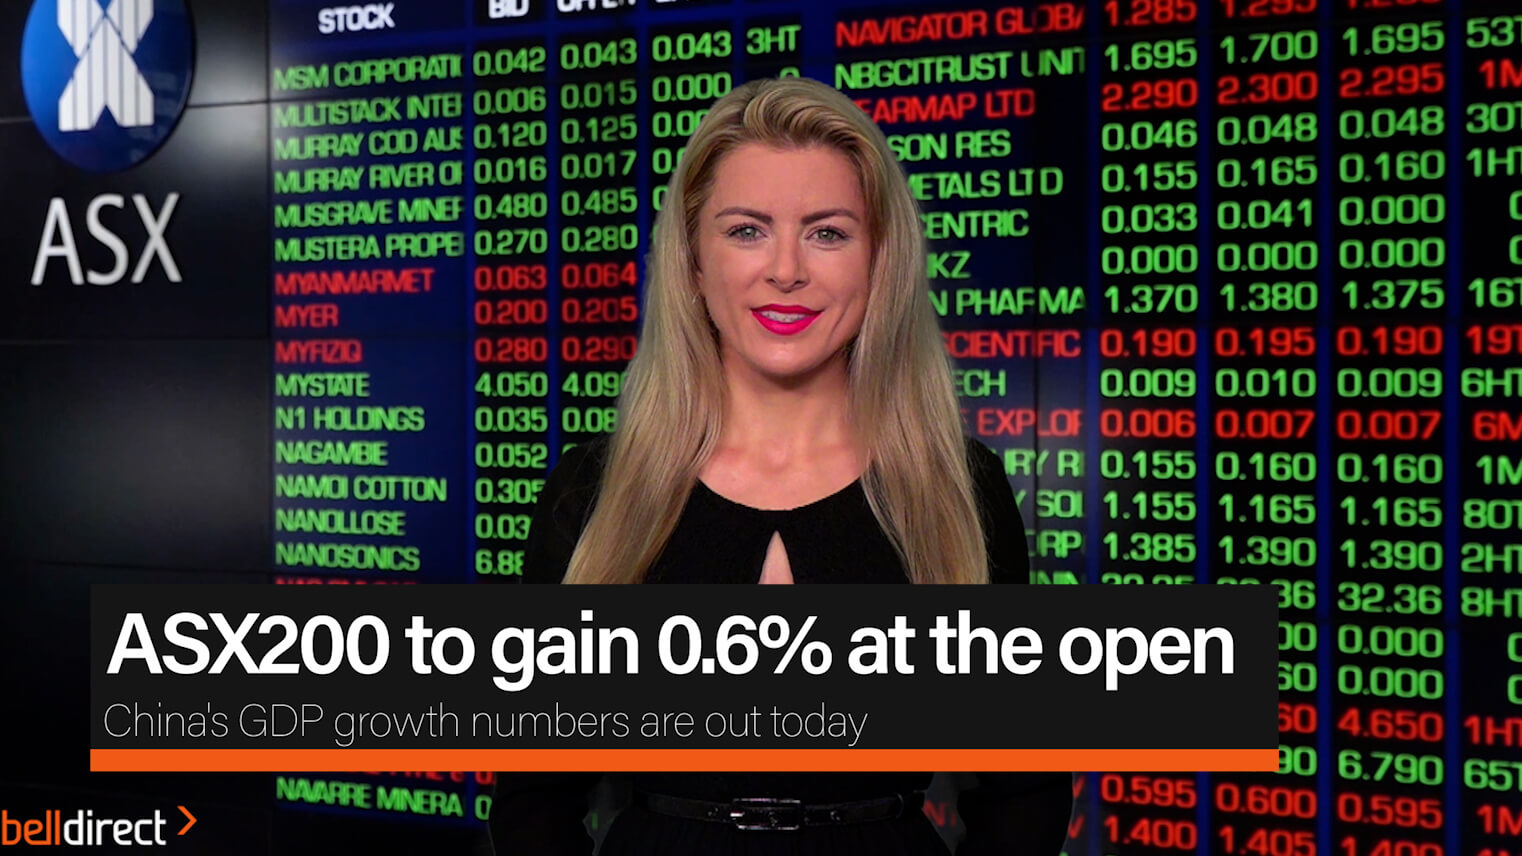 ASX200 to gain 0.6% at the open